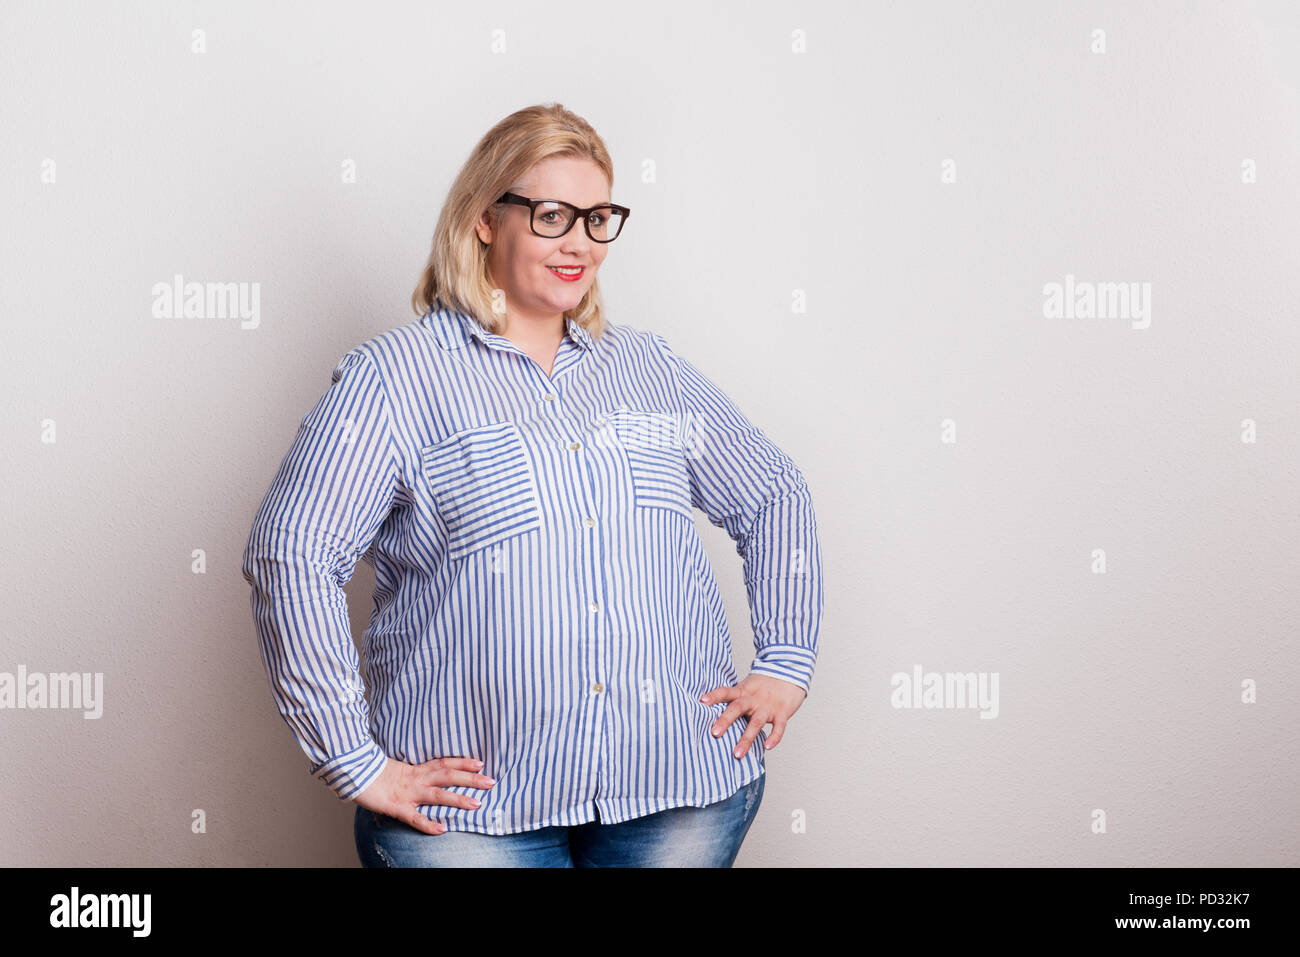 280+ Fat Girl Jeans Stock Photos, Pictures & Royalty-Free Images - iStock